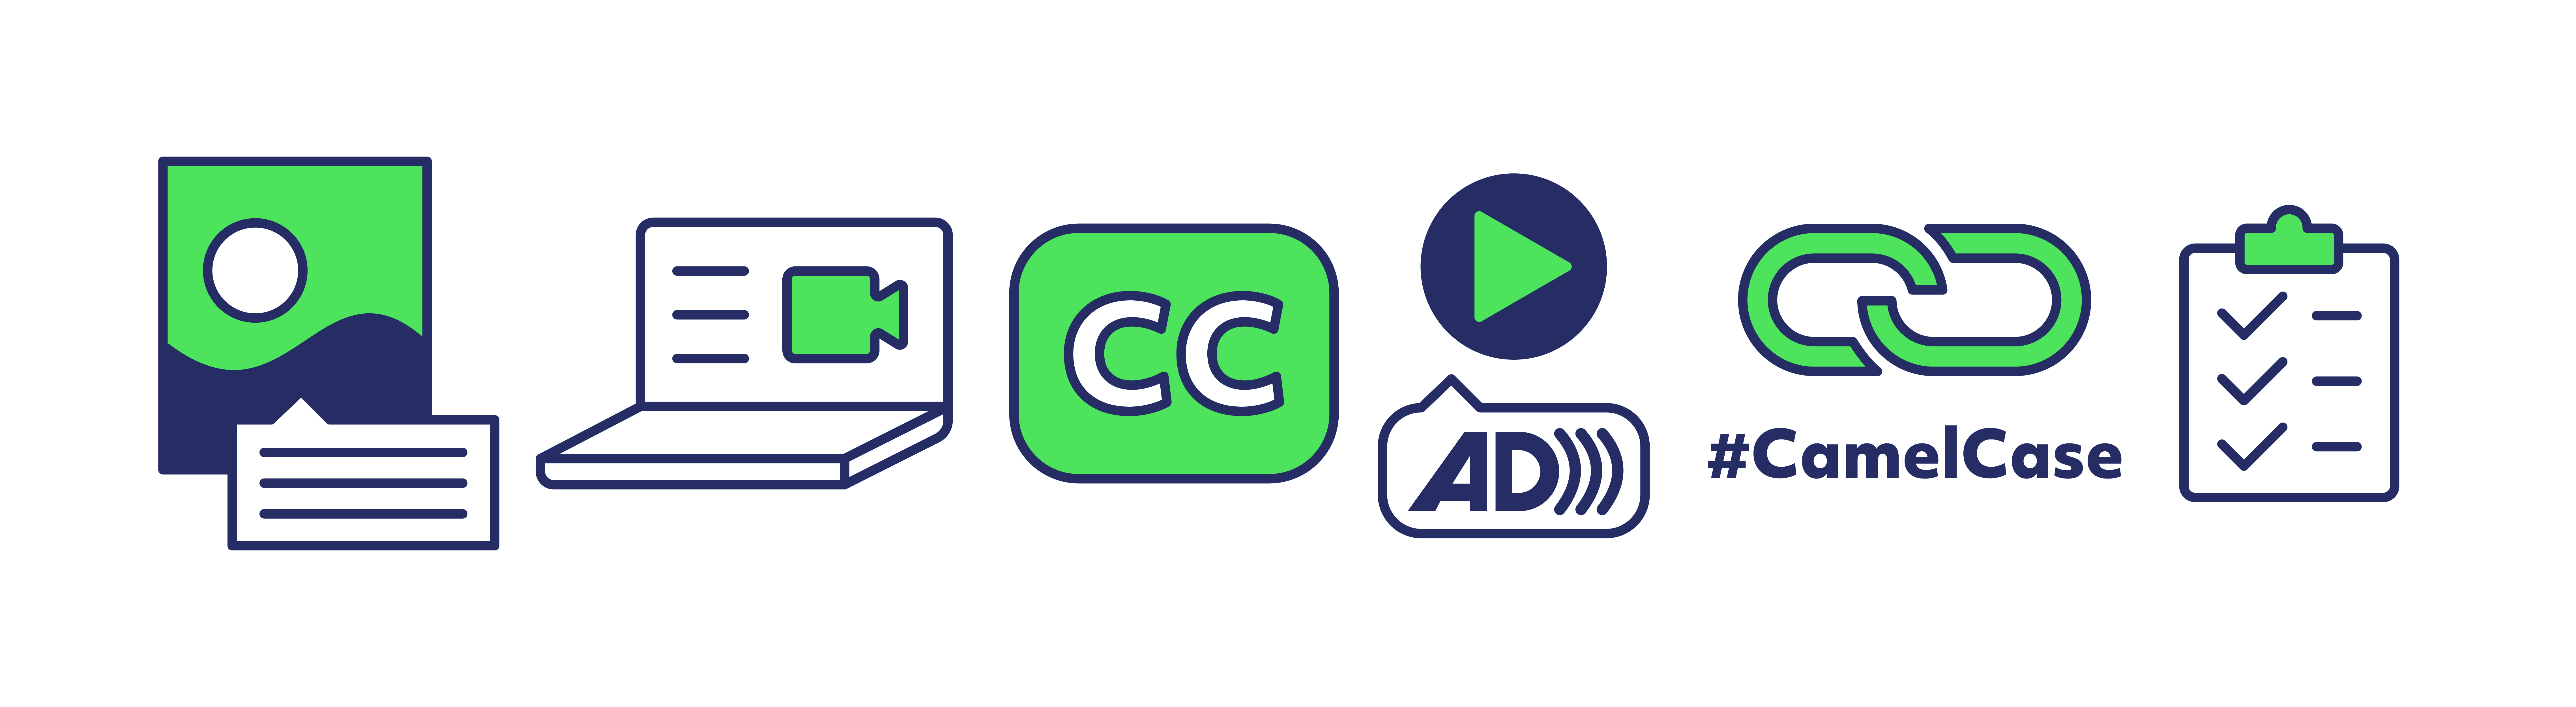 Icons in navy blue and neon green color palette: image alternative text, zoom call with transcript, closed captions, video with audio description, hyperlink, #CamelCase, and checklist.